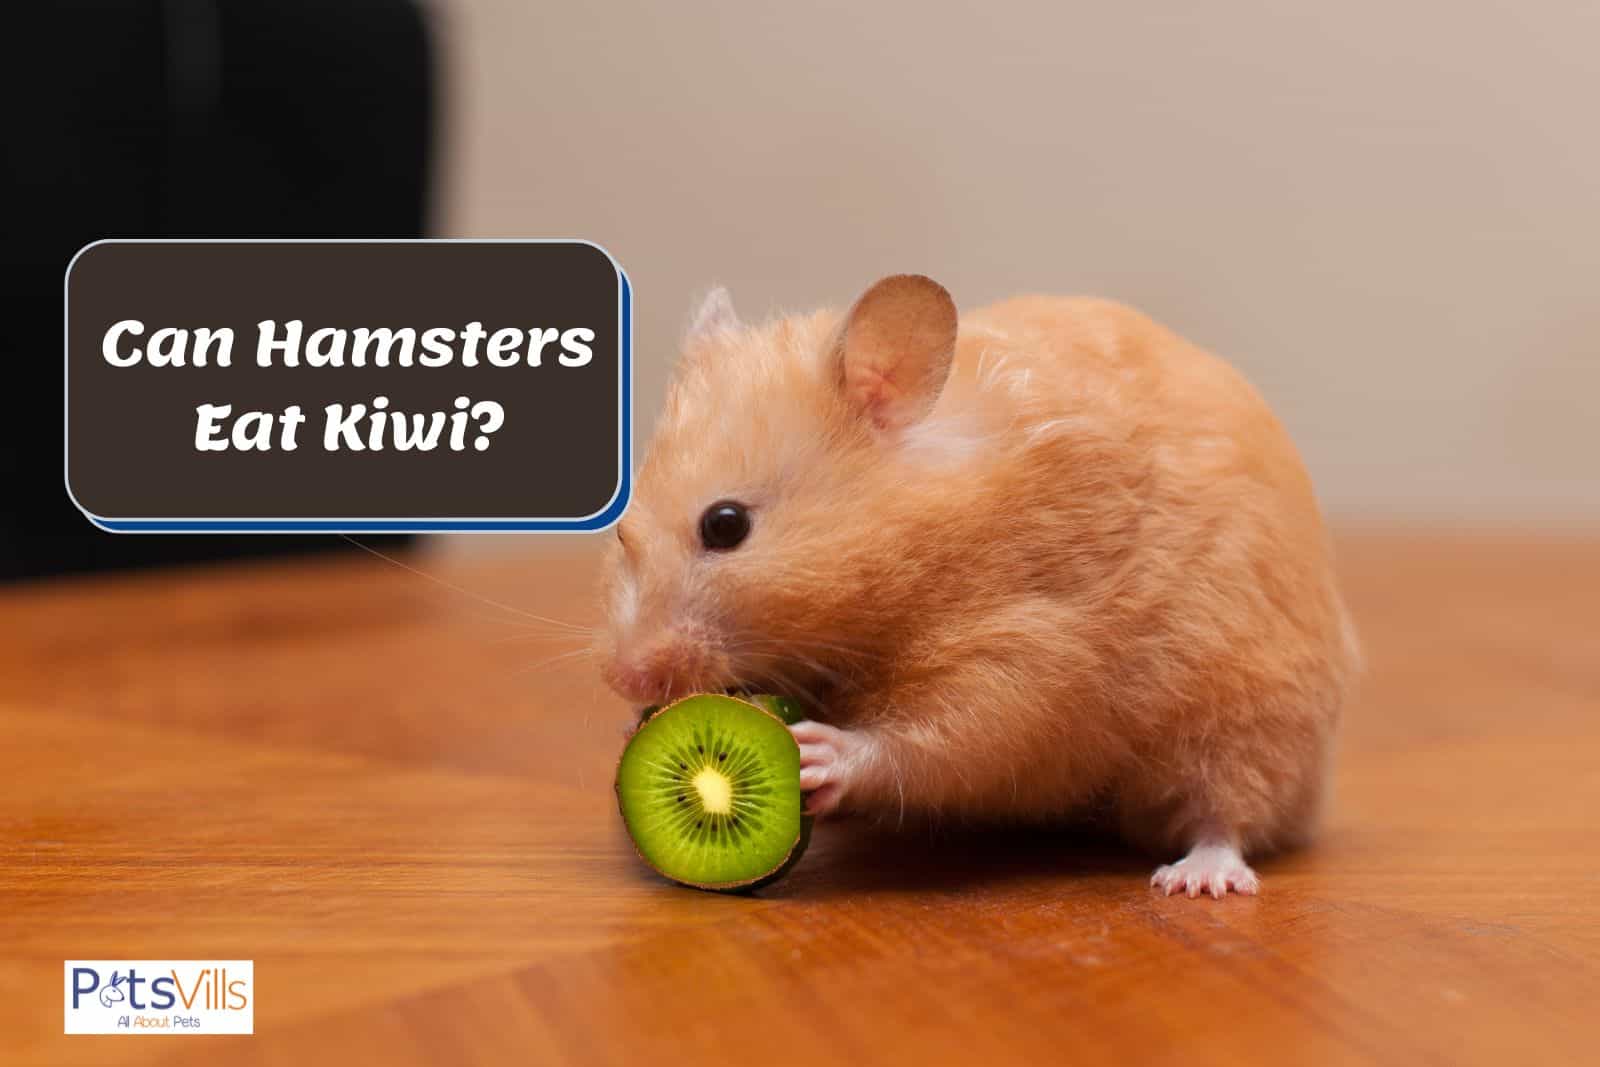 hamster trying to eat kiwi but can hamsters eat kiwi